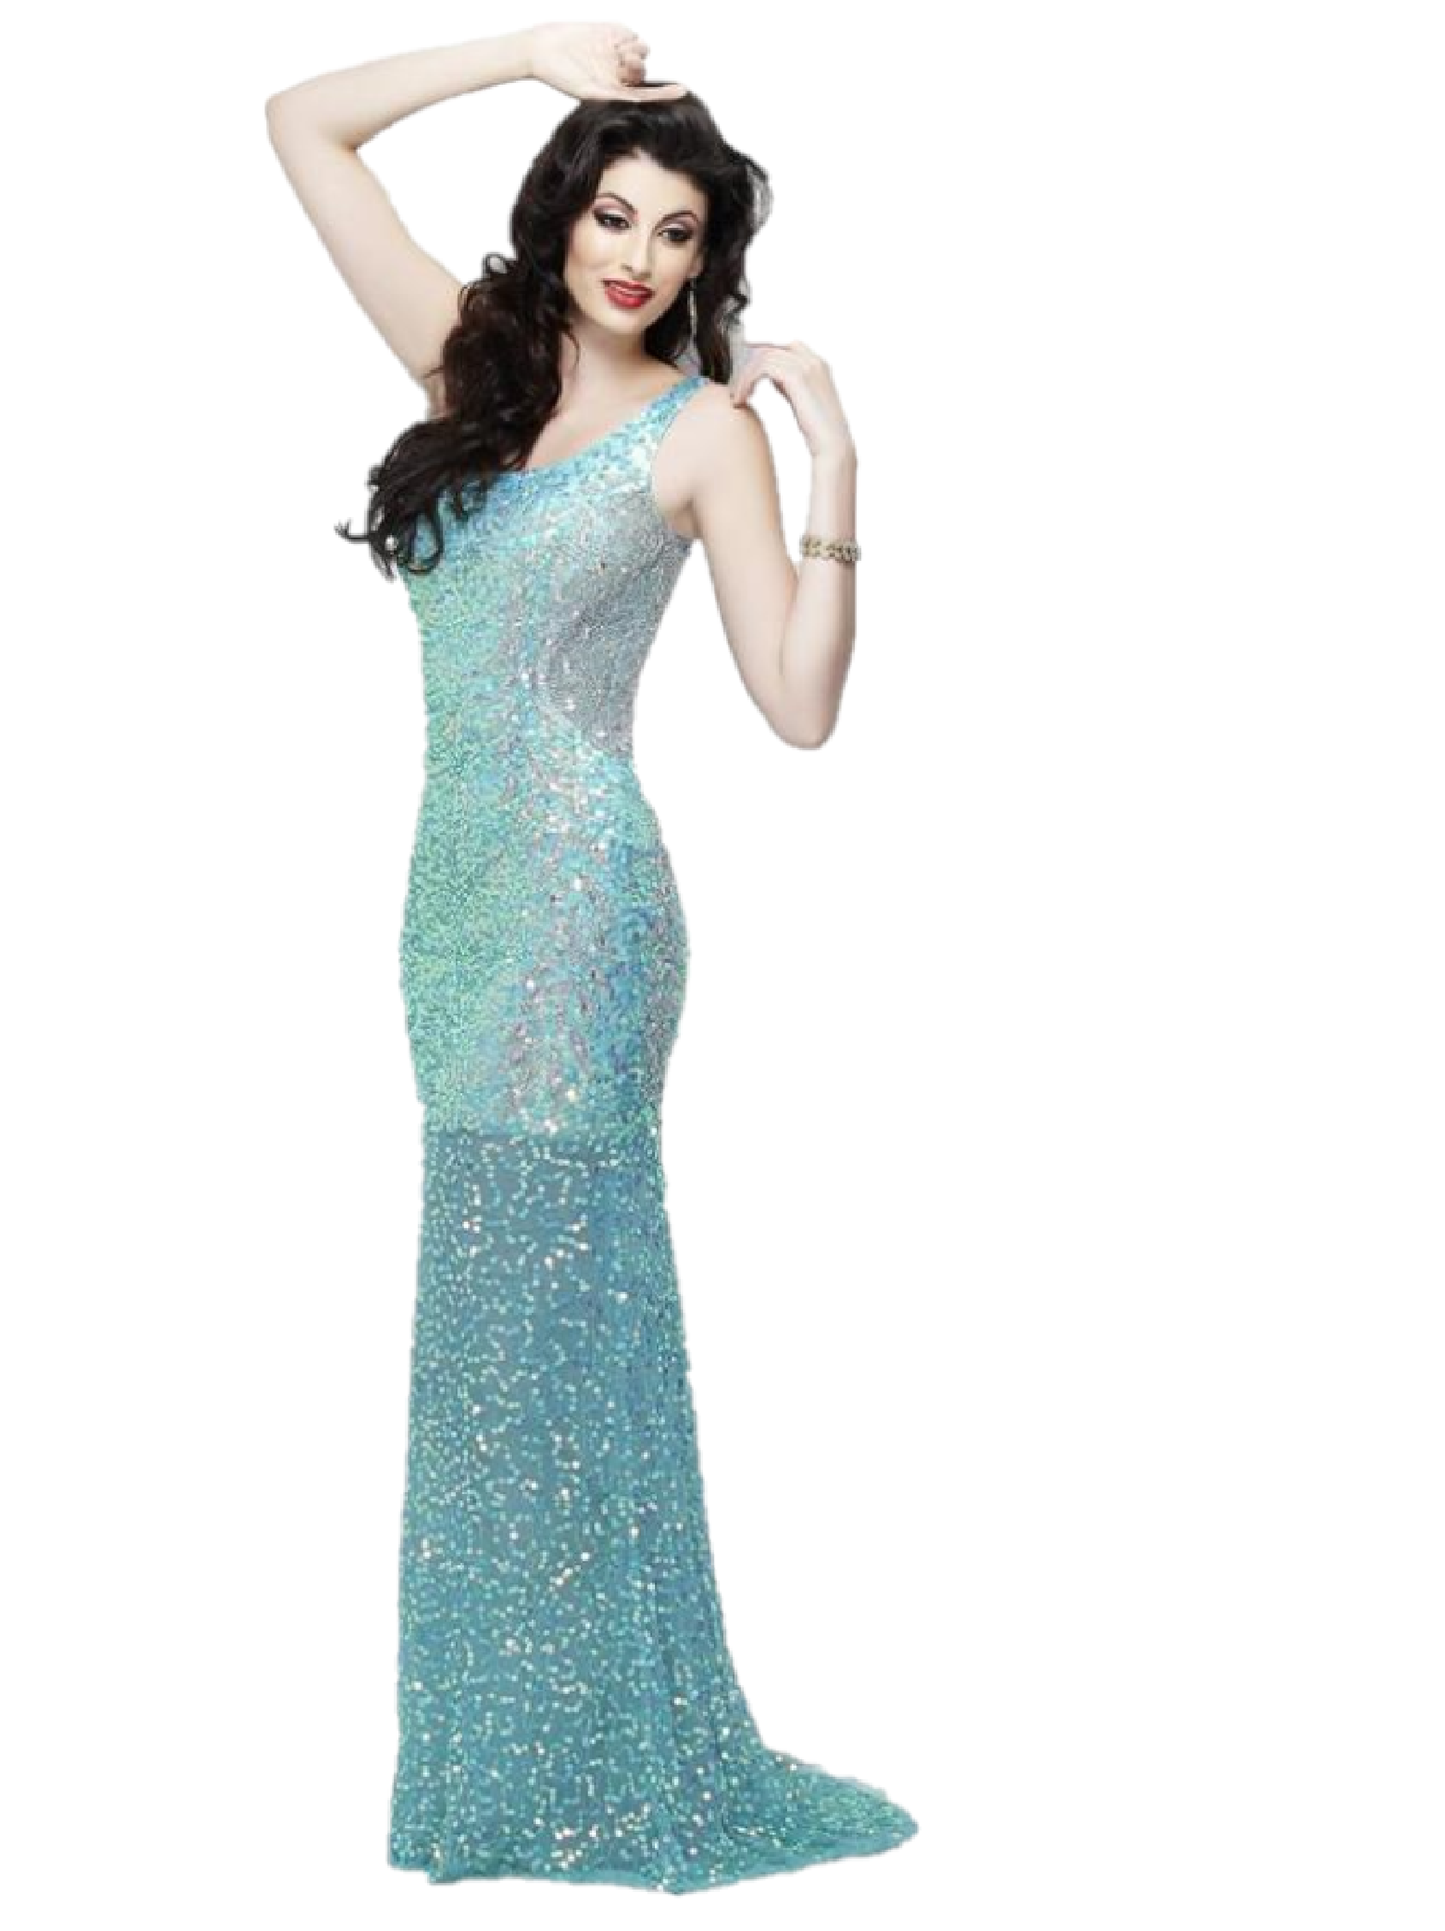 Primavera Couture 9988 is a long fitted asymmetrical one shoulder neckline fully embellished sequin formal prom & Pageant Dress. Featuring beading & Crystal accents along the side & Back. Sheer embellished long column skirt with sweeping train. Available Size: Aqua  Available Color: 2